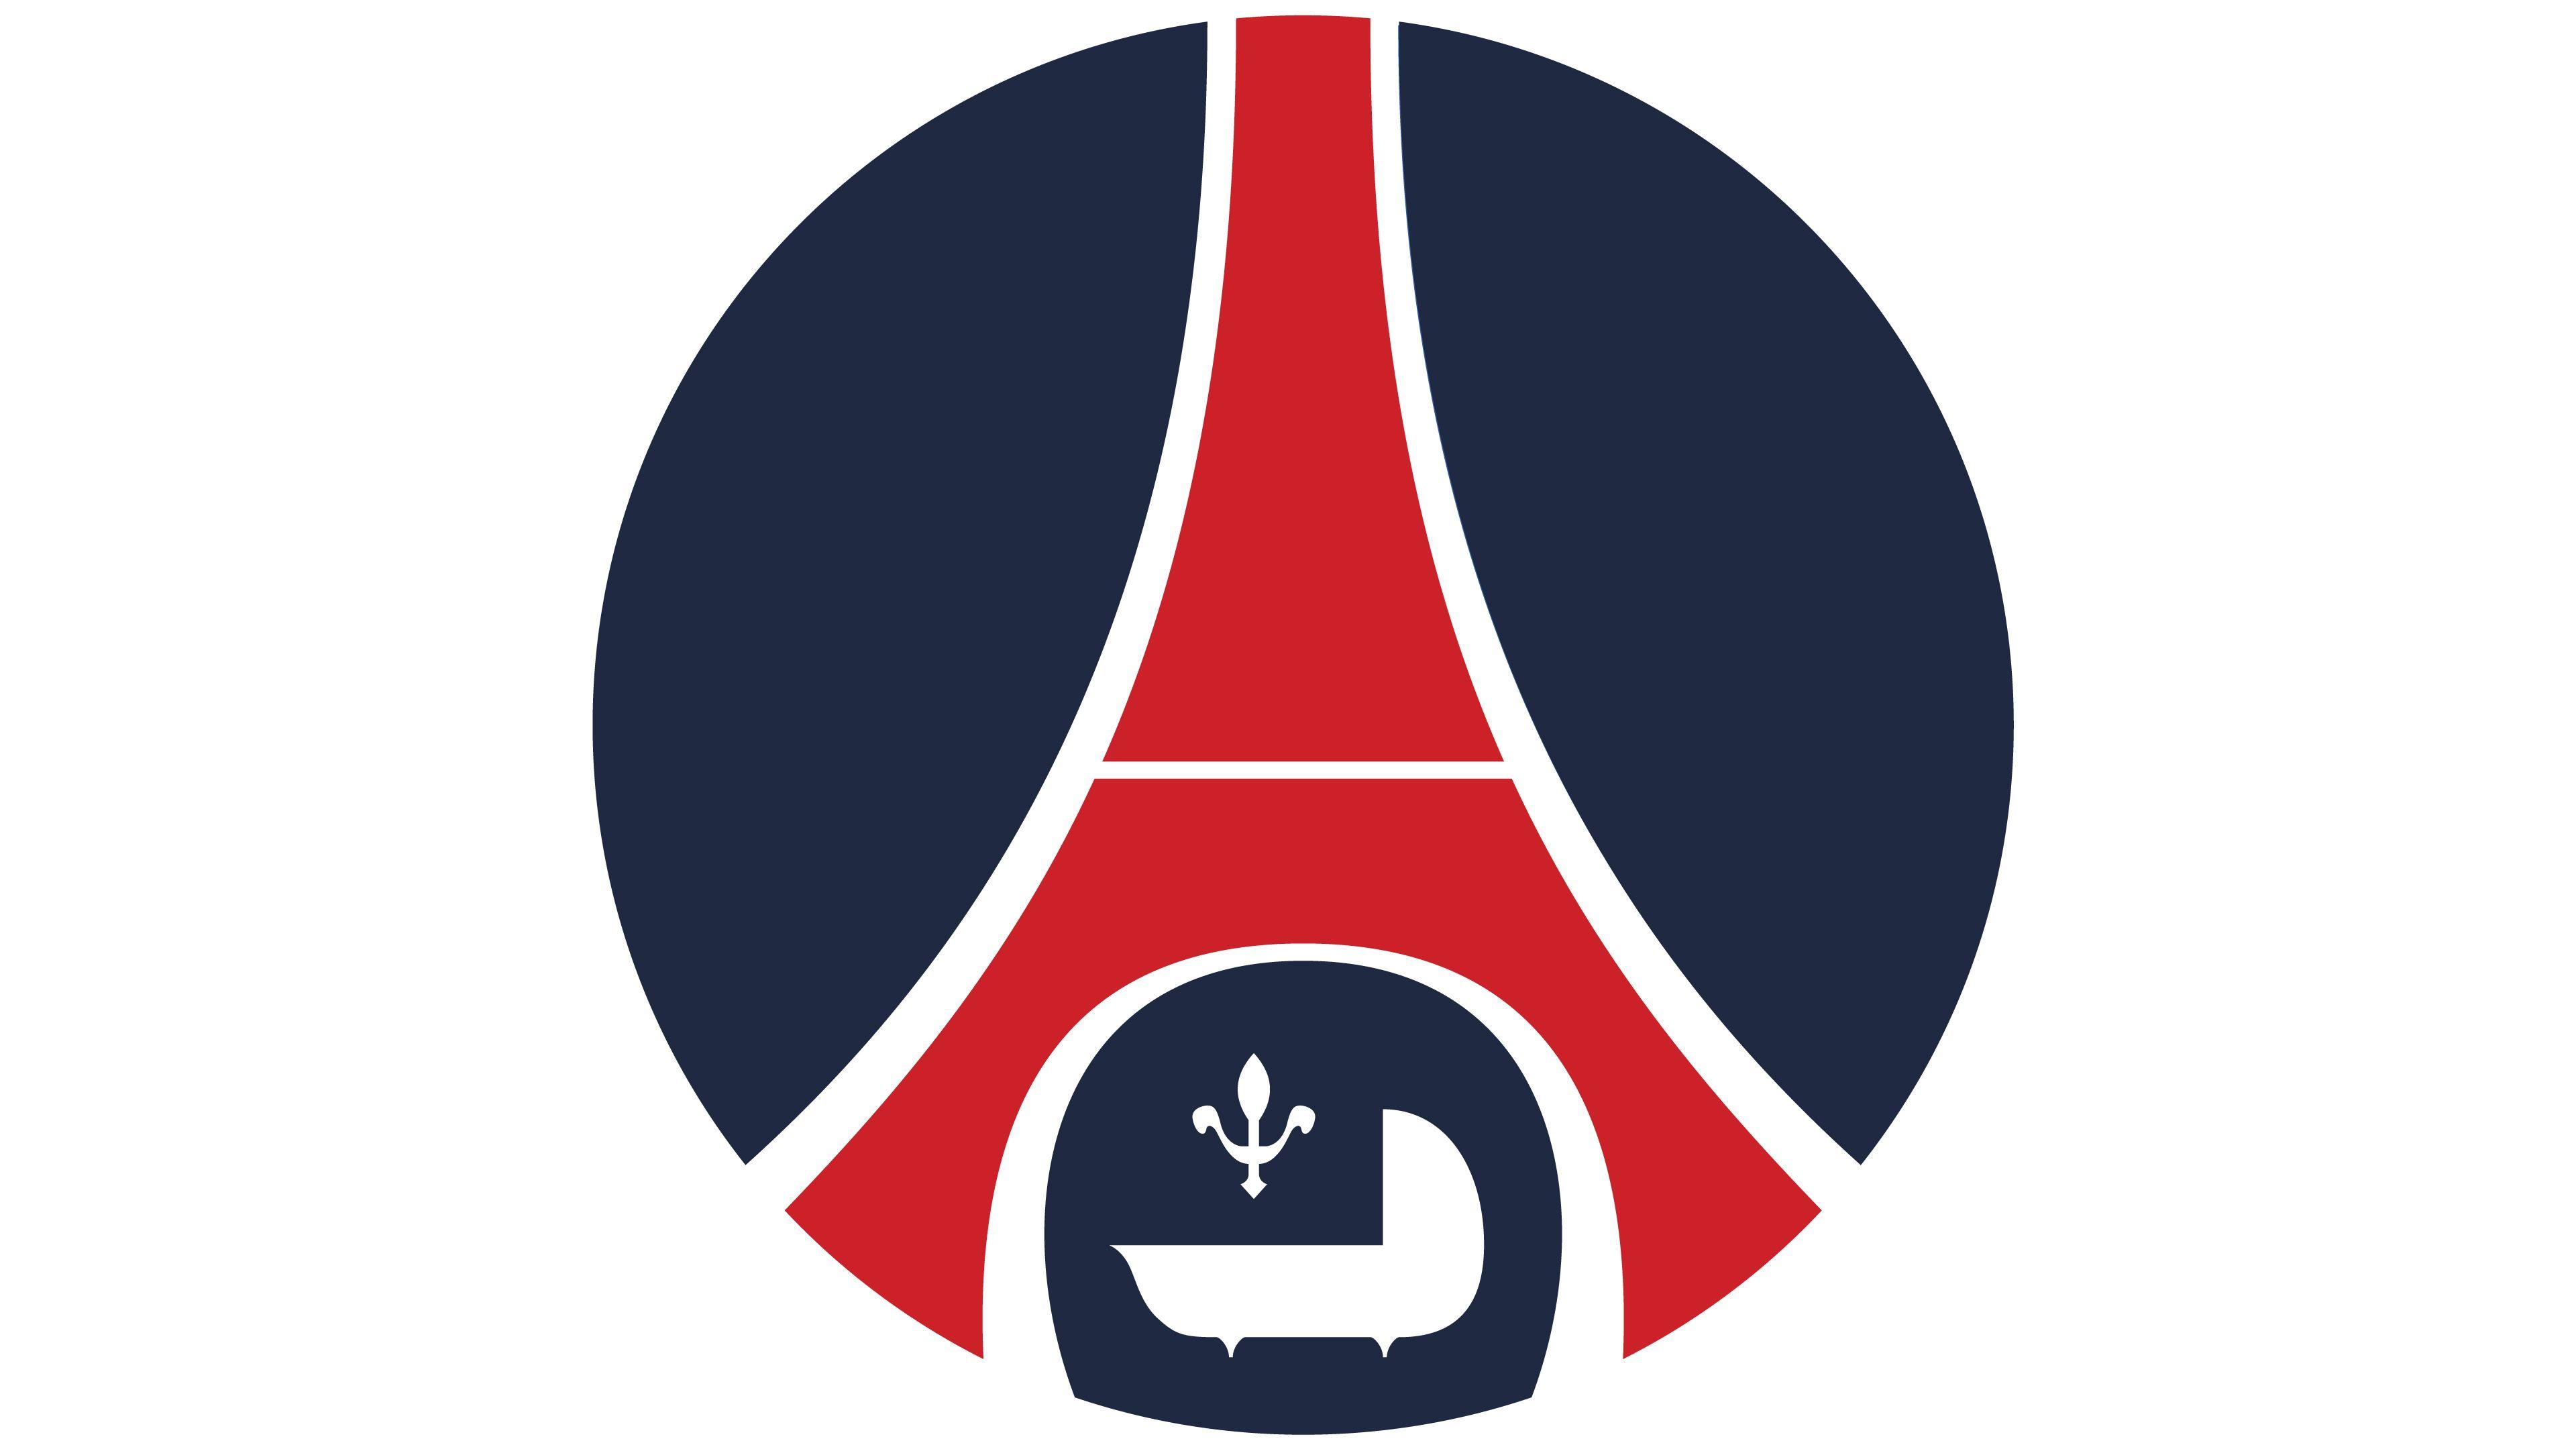 Red Hexagon Sports Logo - PSG logo - Interesting History of the Team Name and emblem